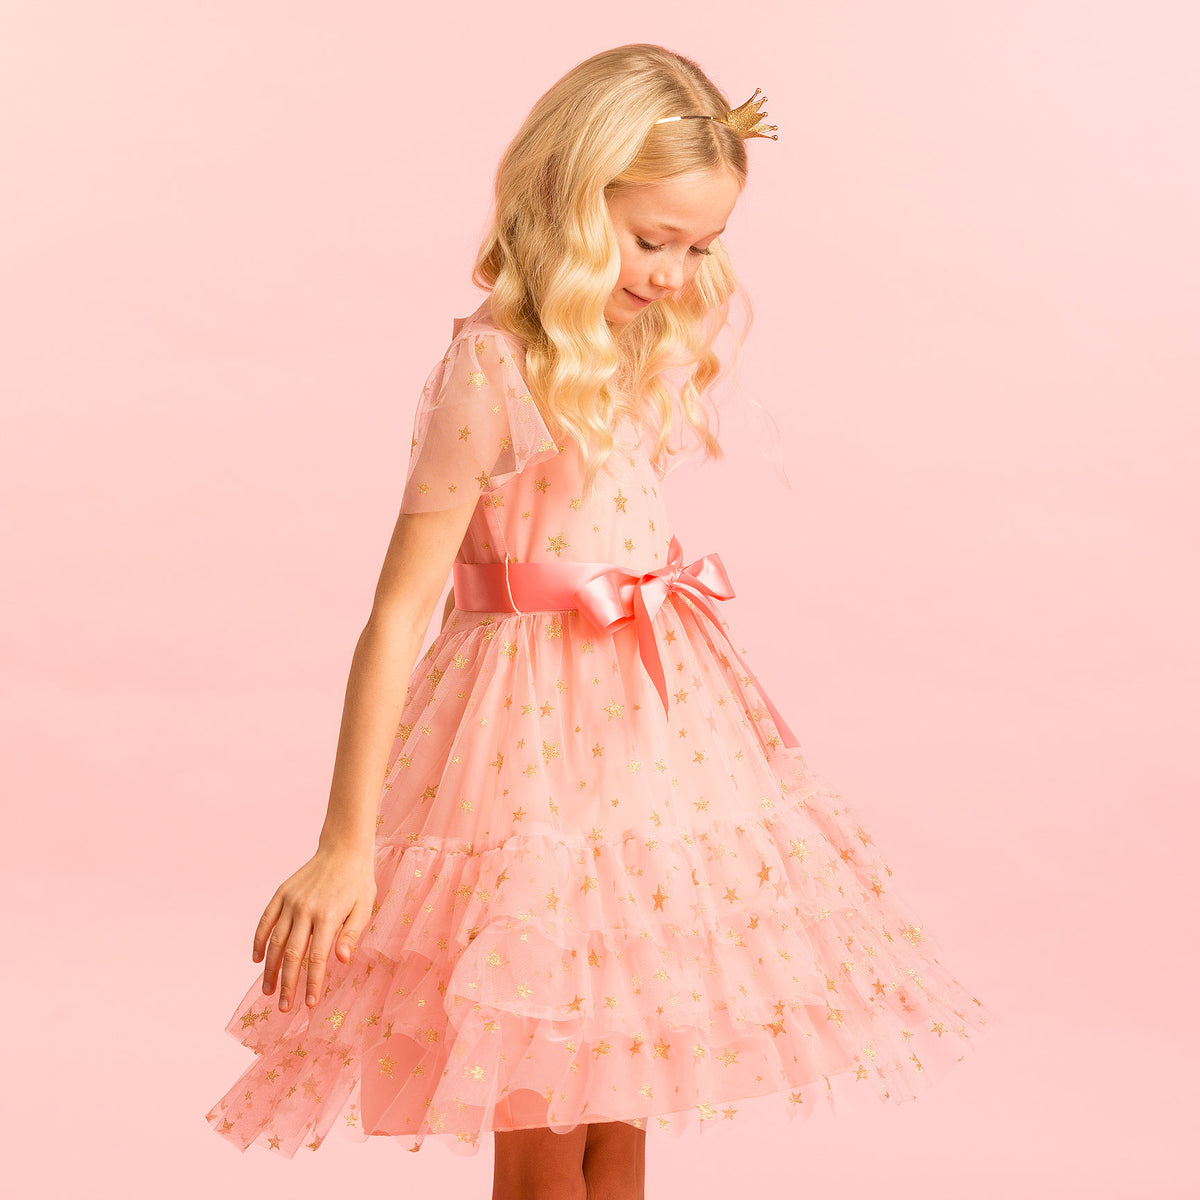 Girls Party Dress Cinderella Sugar Pink & Gold Star Tulle | Holly Hastie London